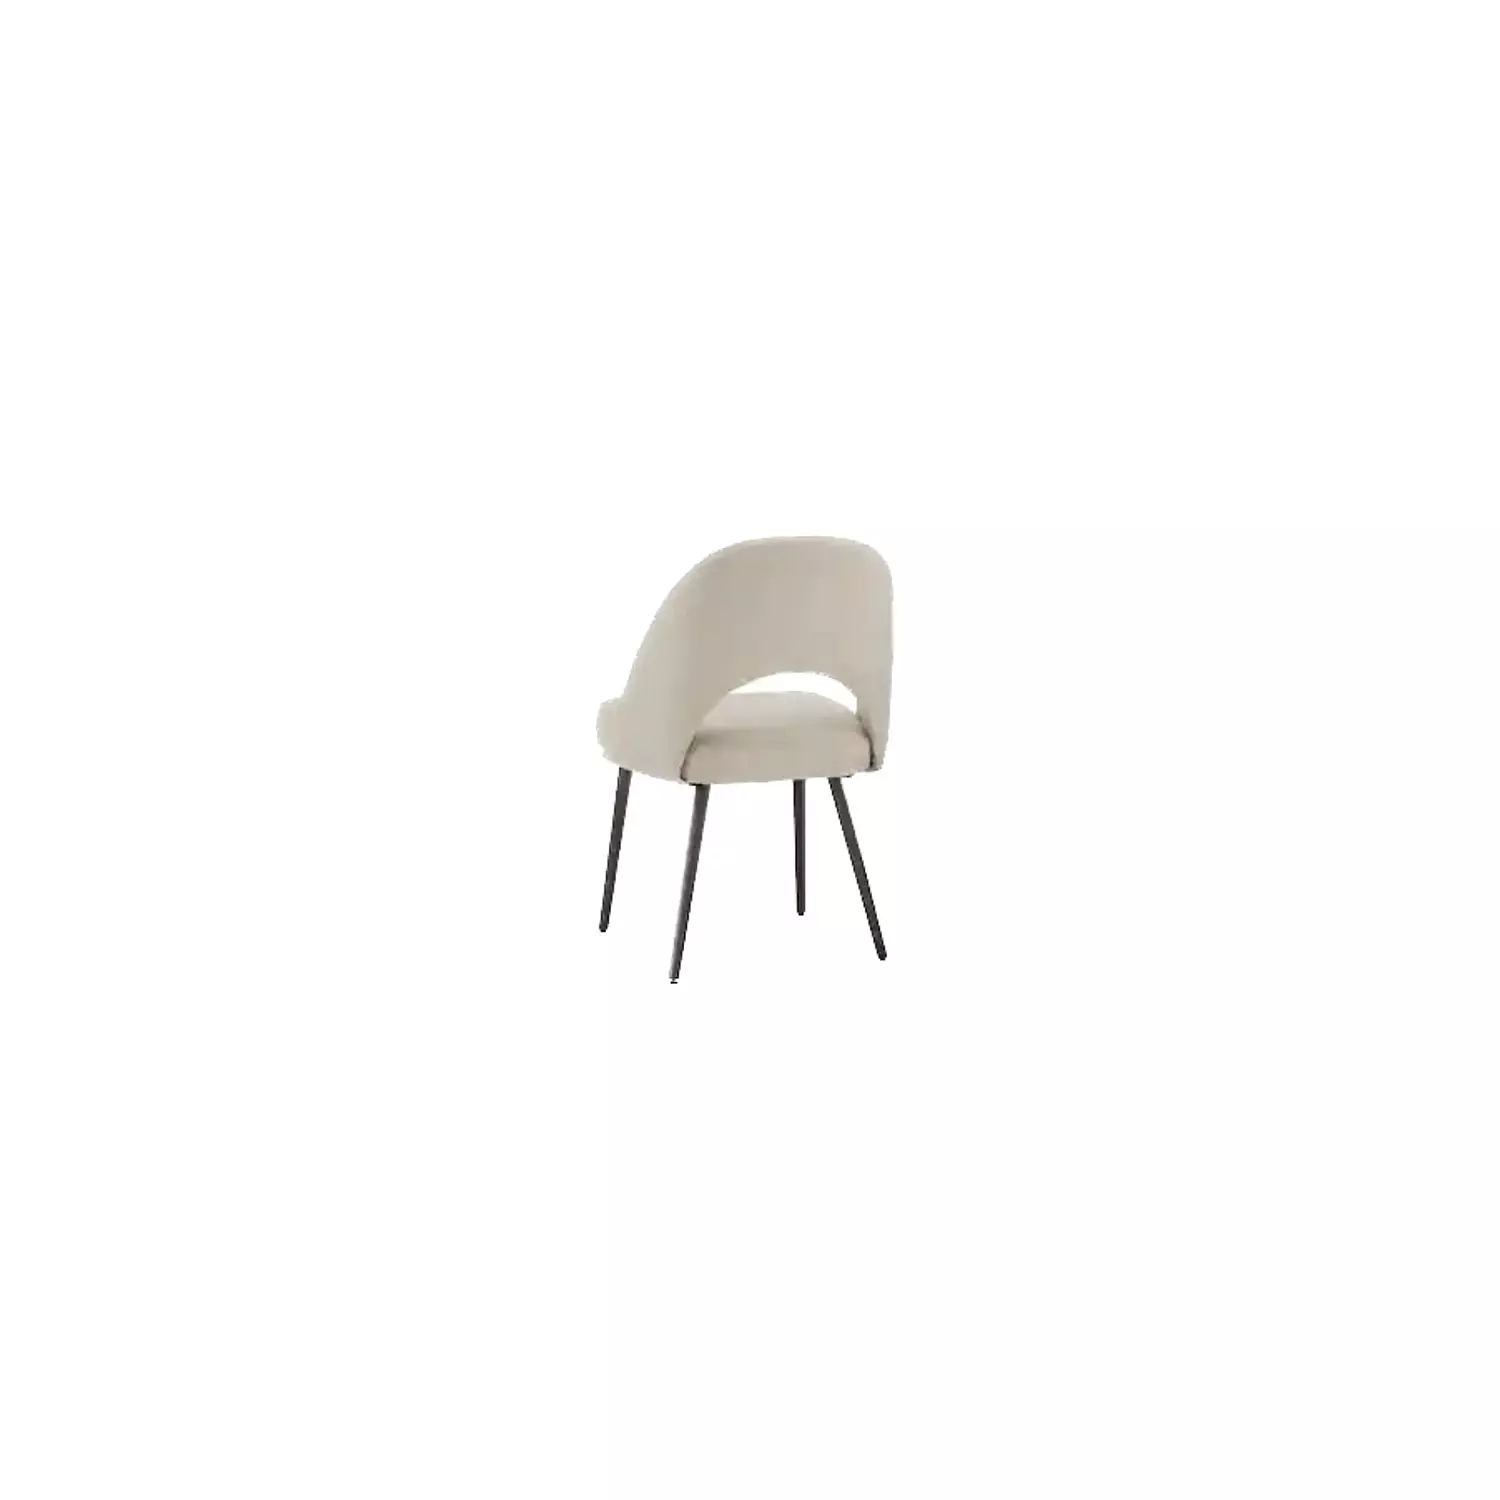 ETNA CHAIR hover image